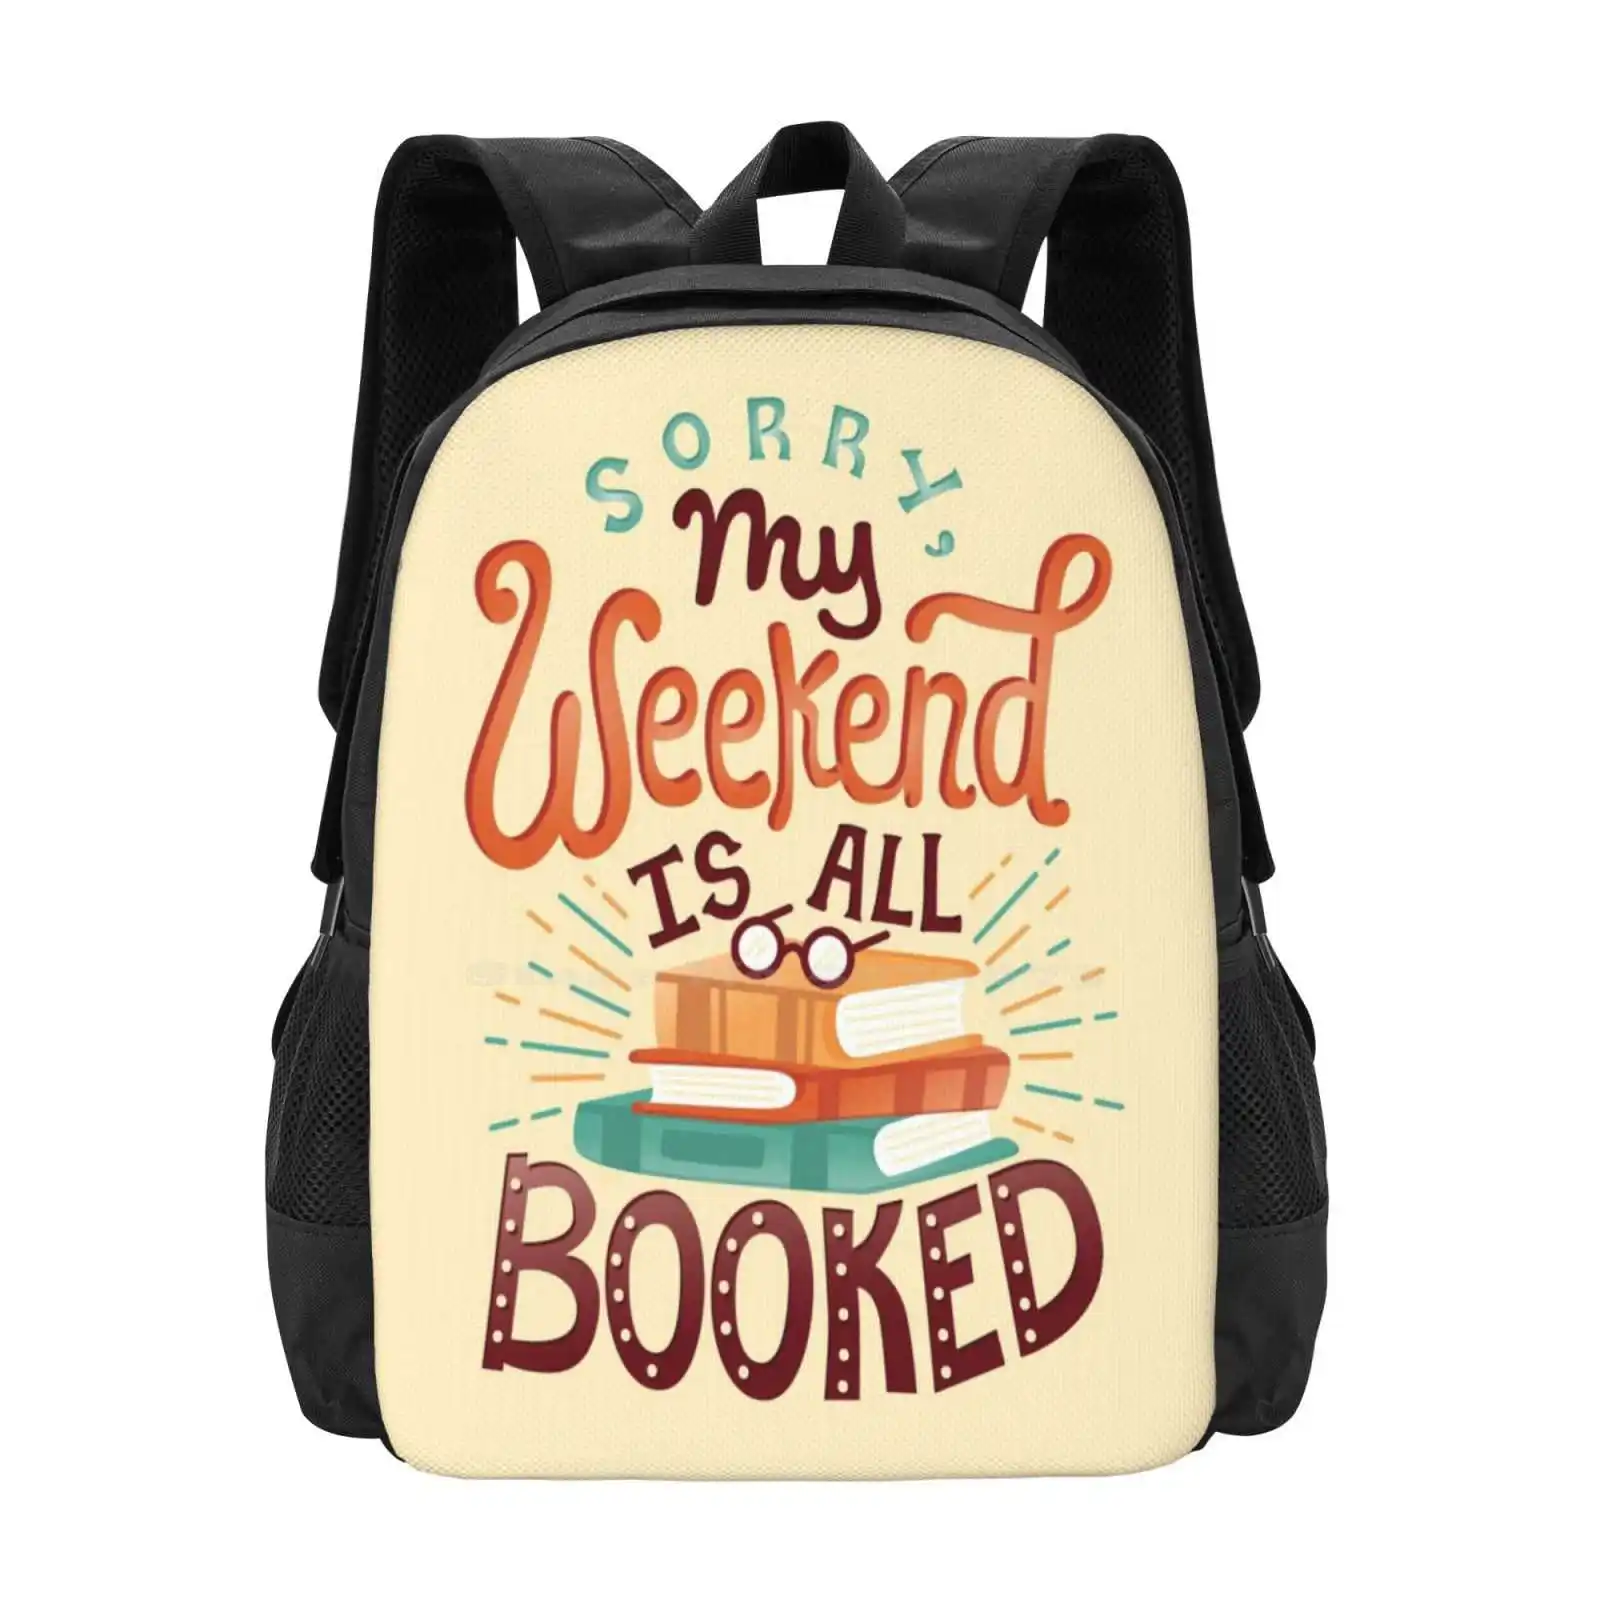 

I'M Booked Large Capacity School Backpack Laptop Bags Bookworm Book Lover Books Reading Reader Hand Lettering Weekend Booked